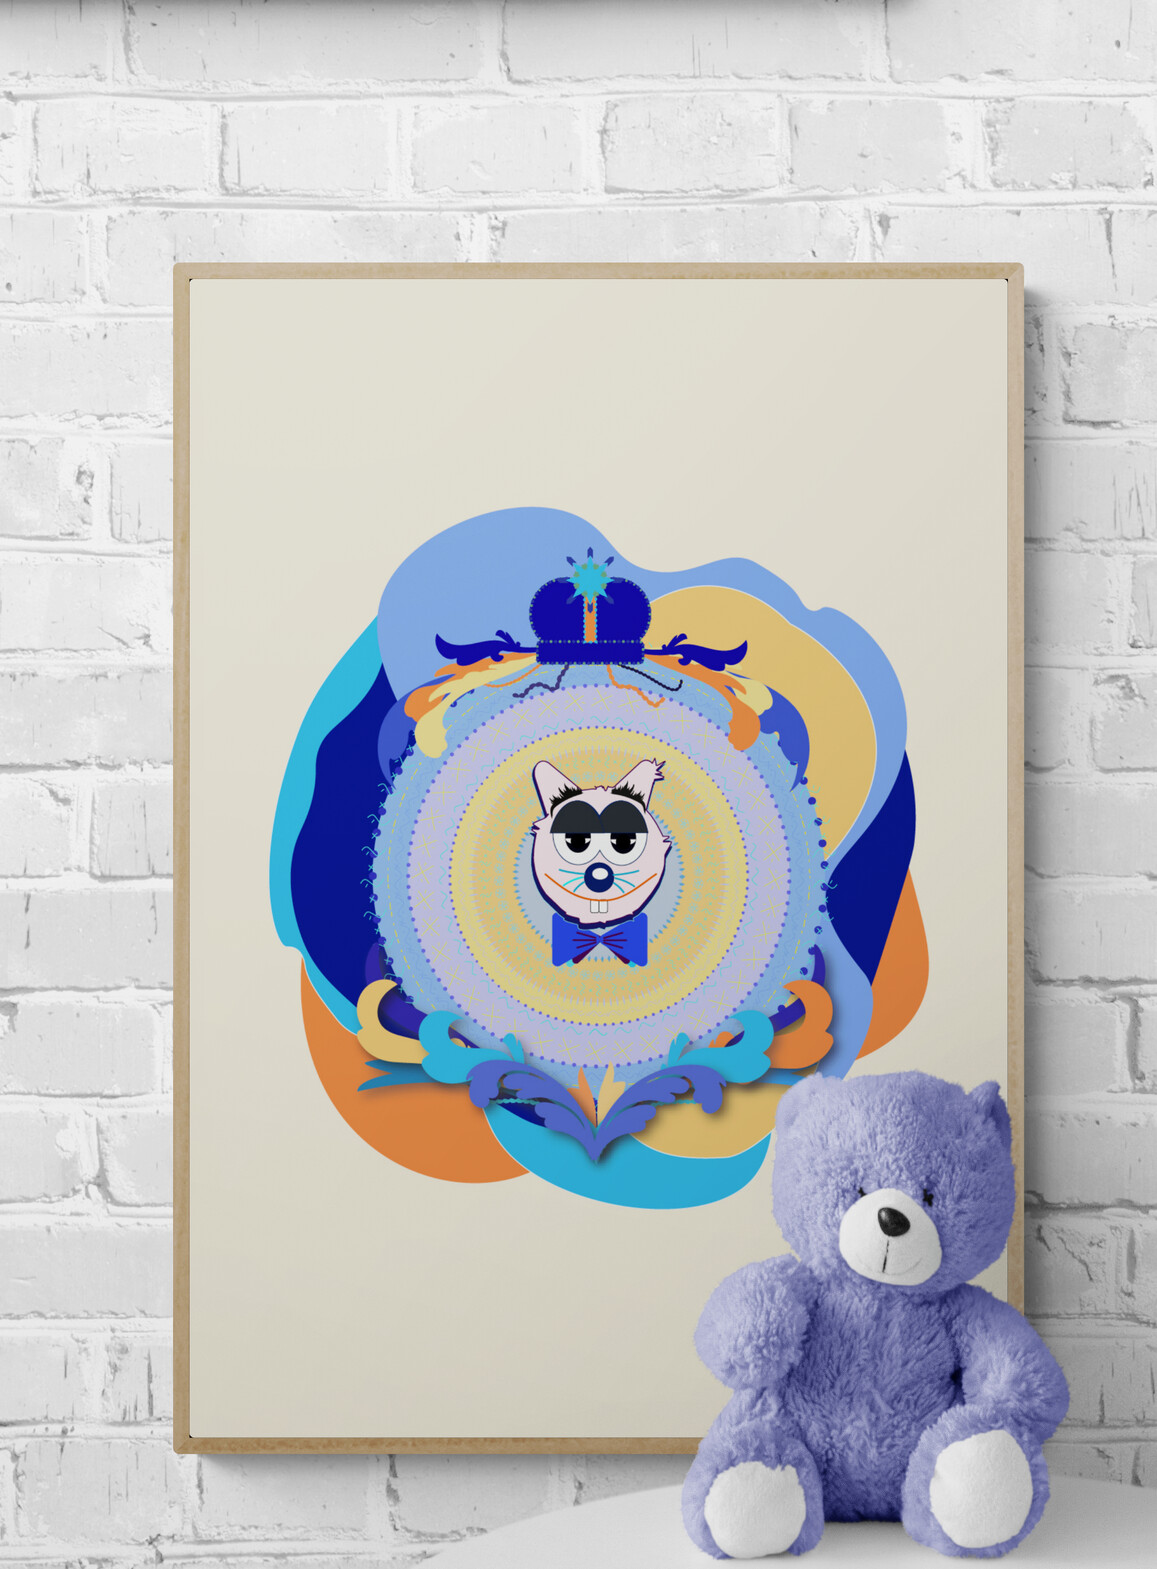 dad cat framed poster decoration with teddy